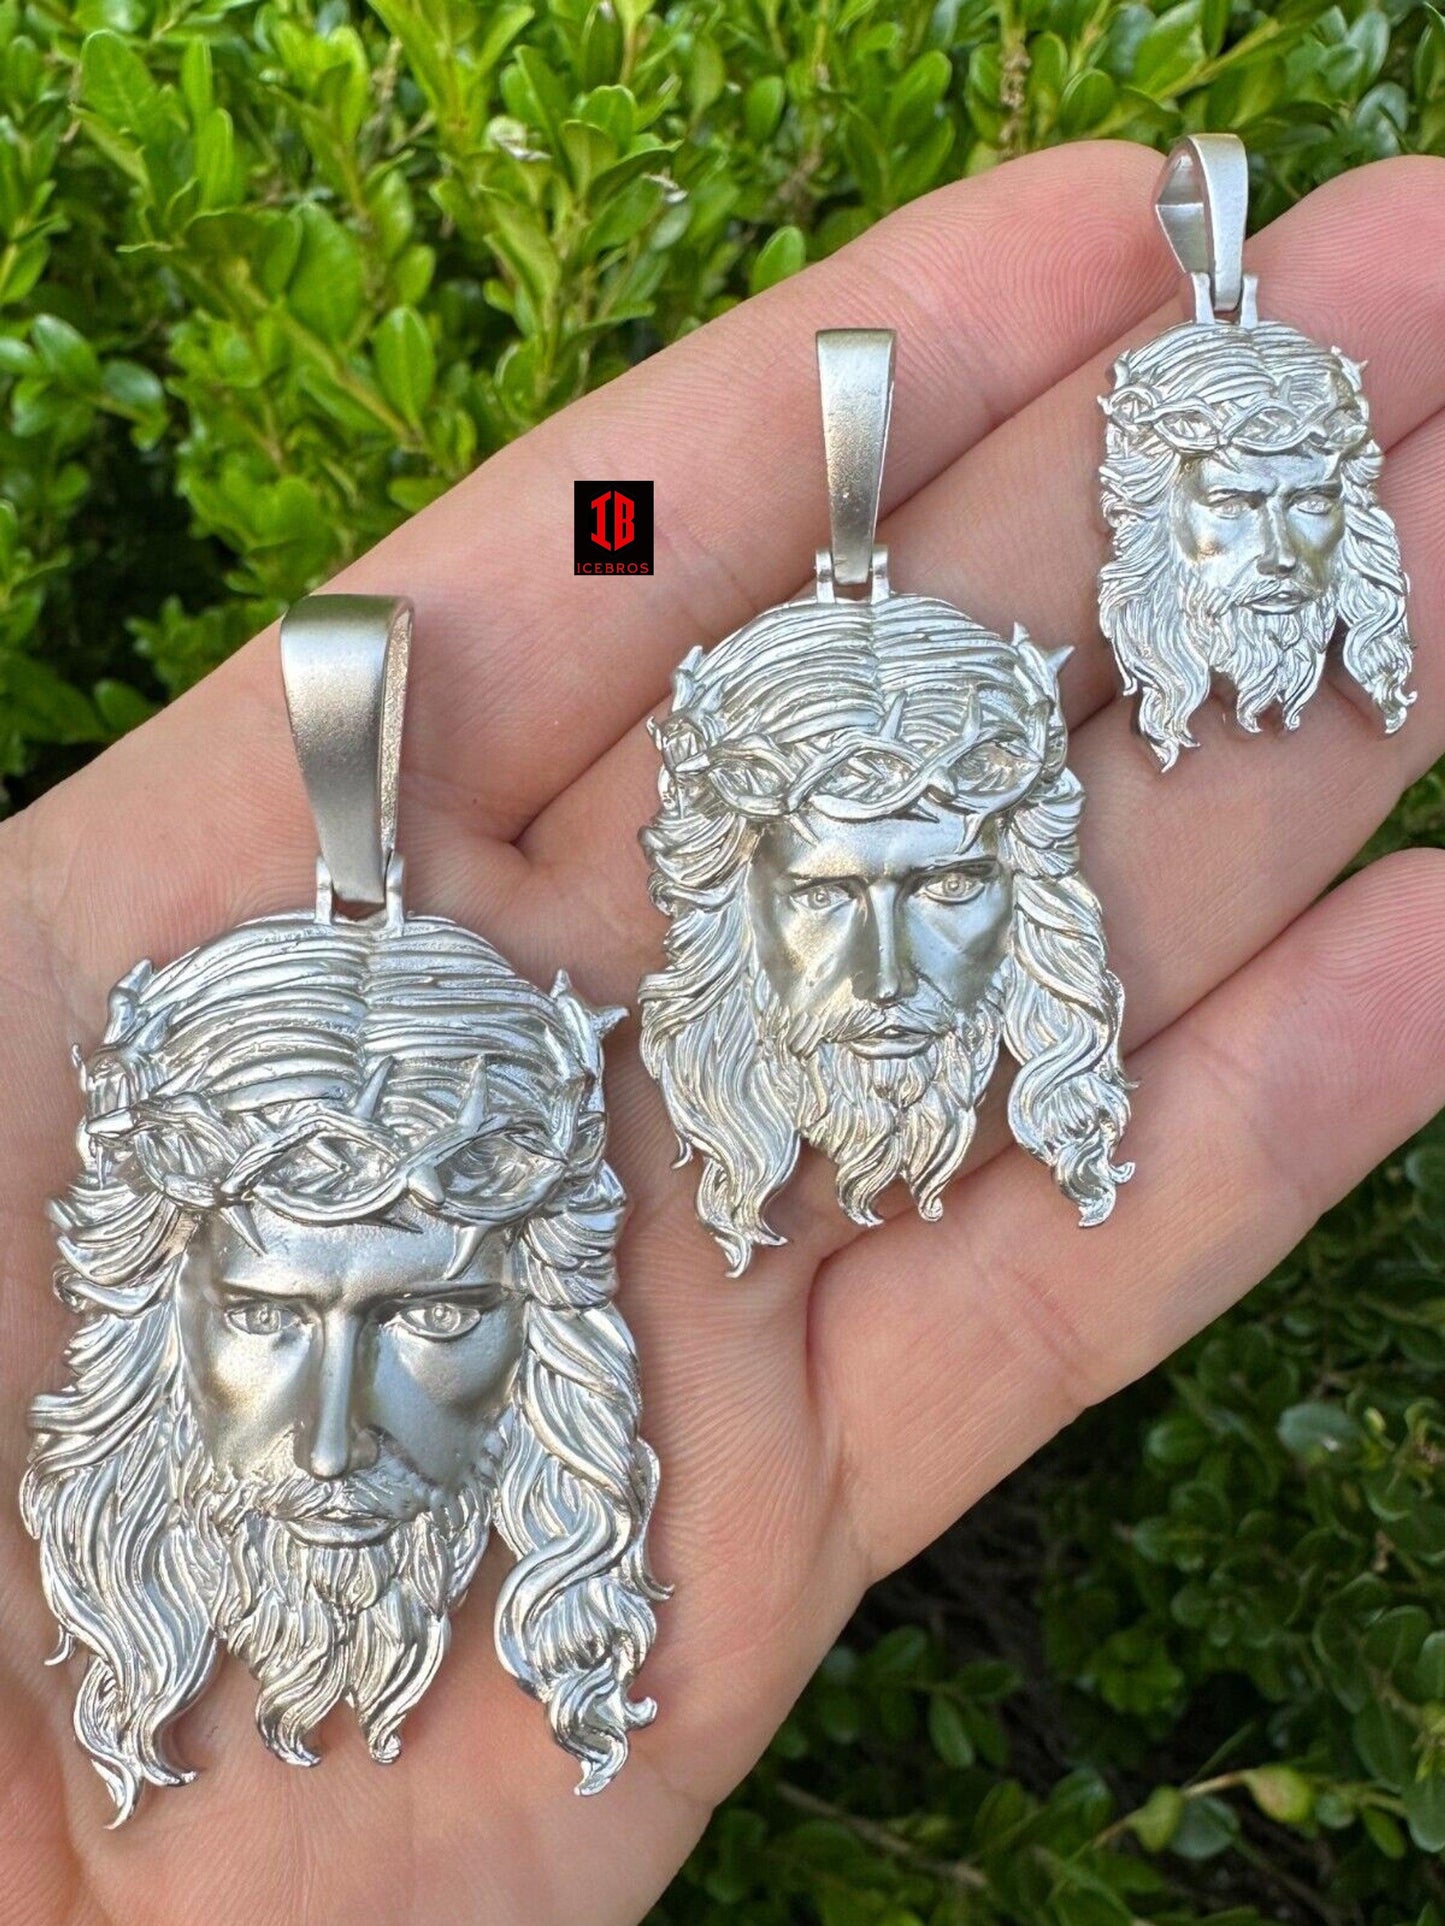 VERY HEAVY Fine  925 ITALY Silver Jesus Piece Iced Pendant Chain - 3 Sizes